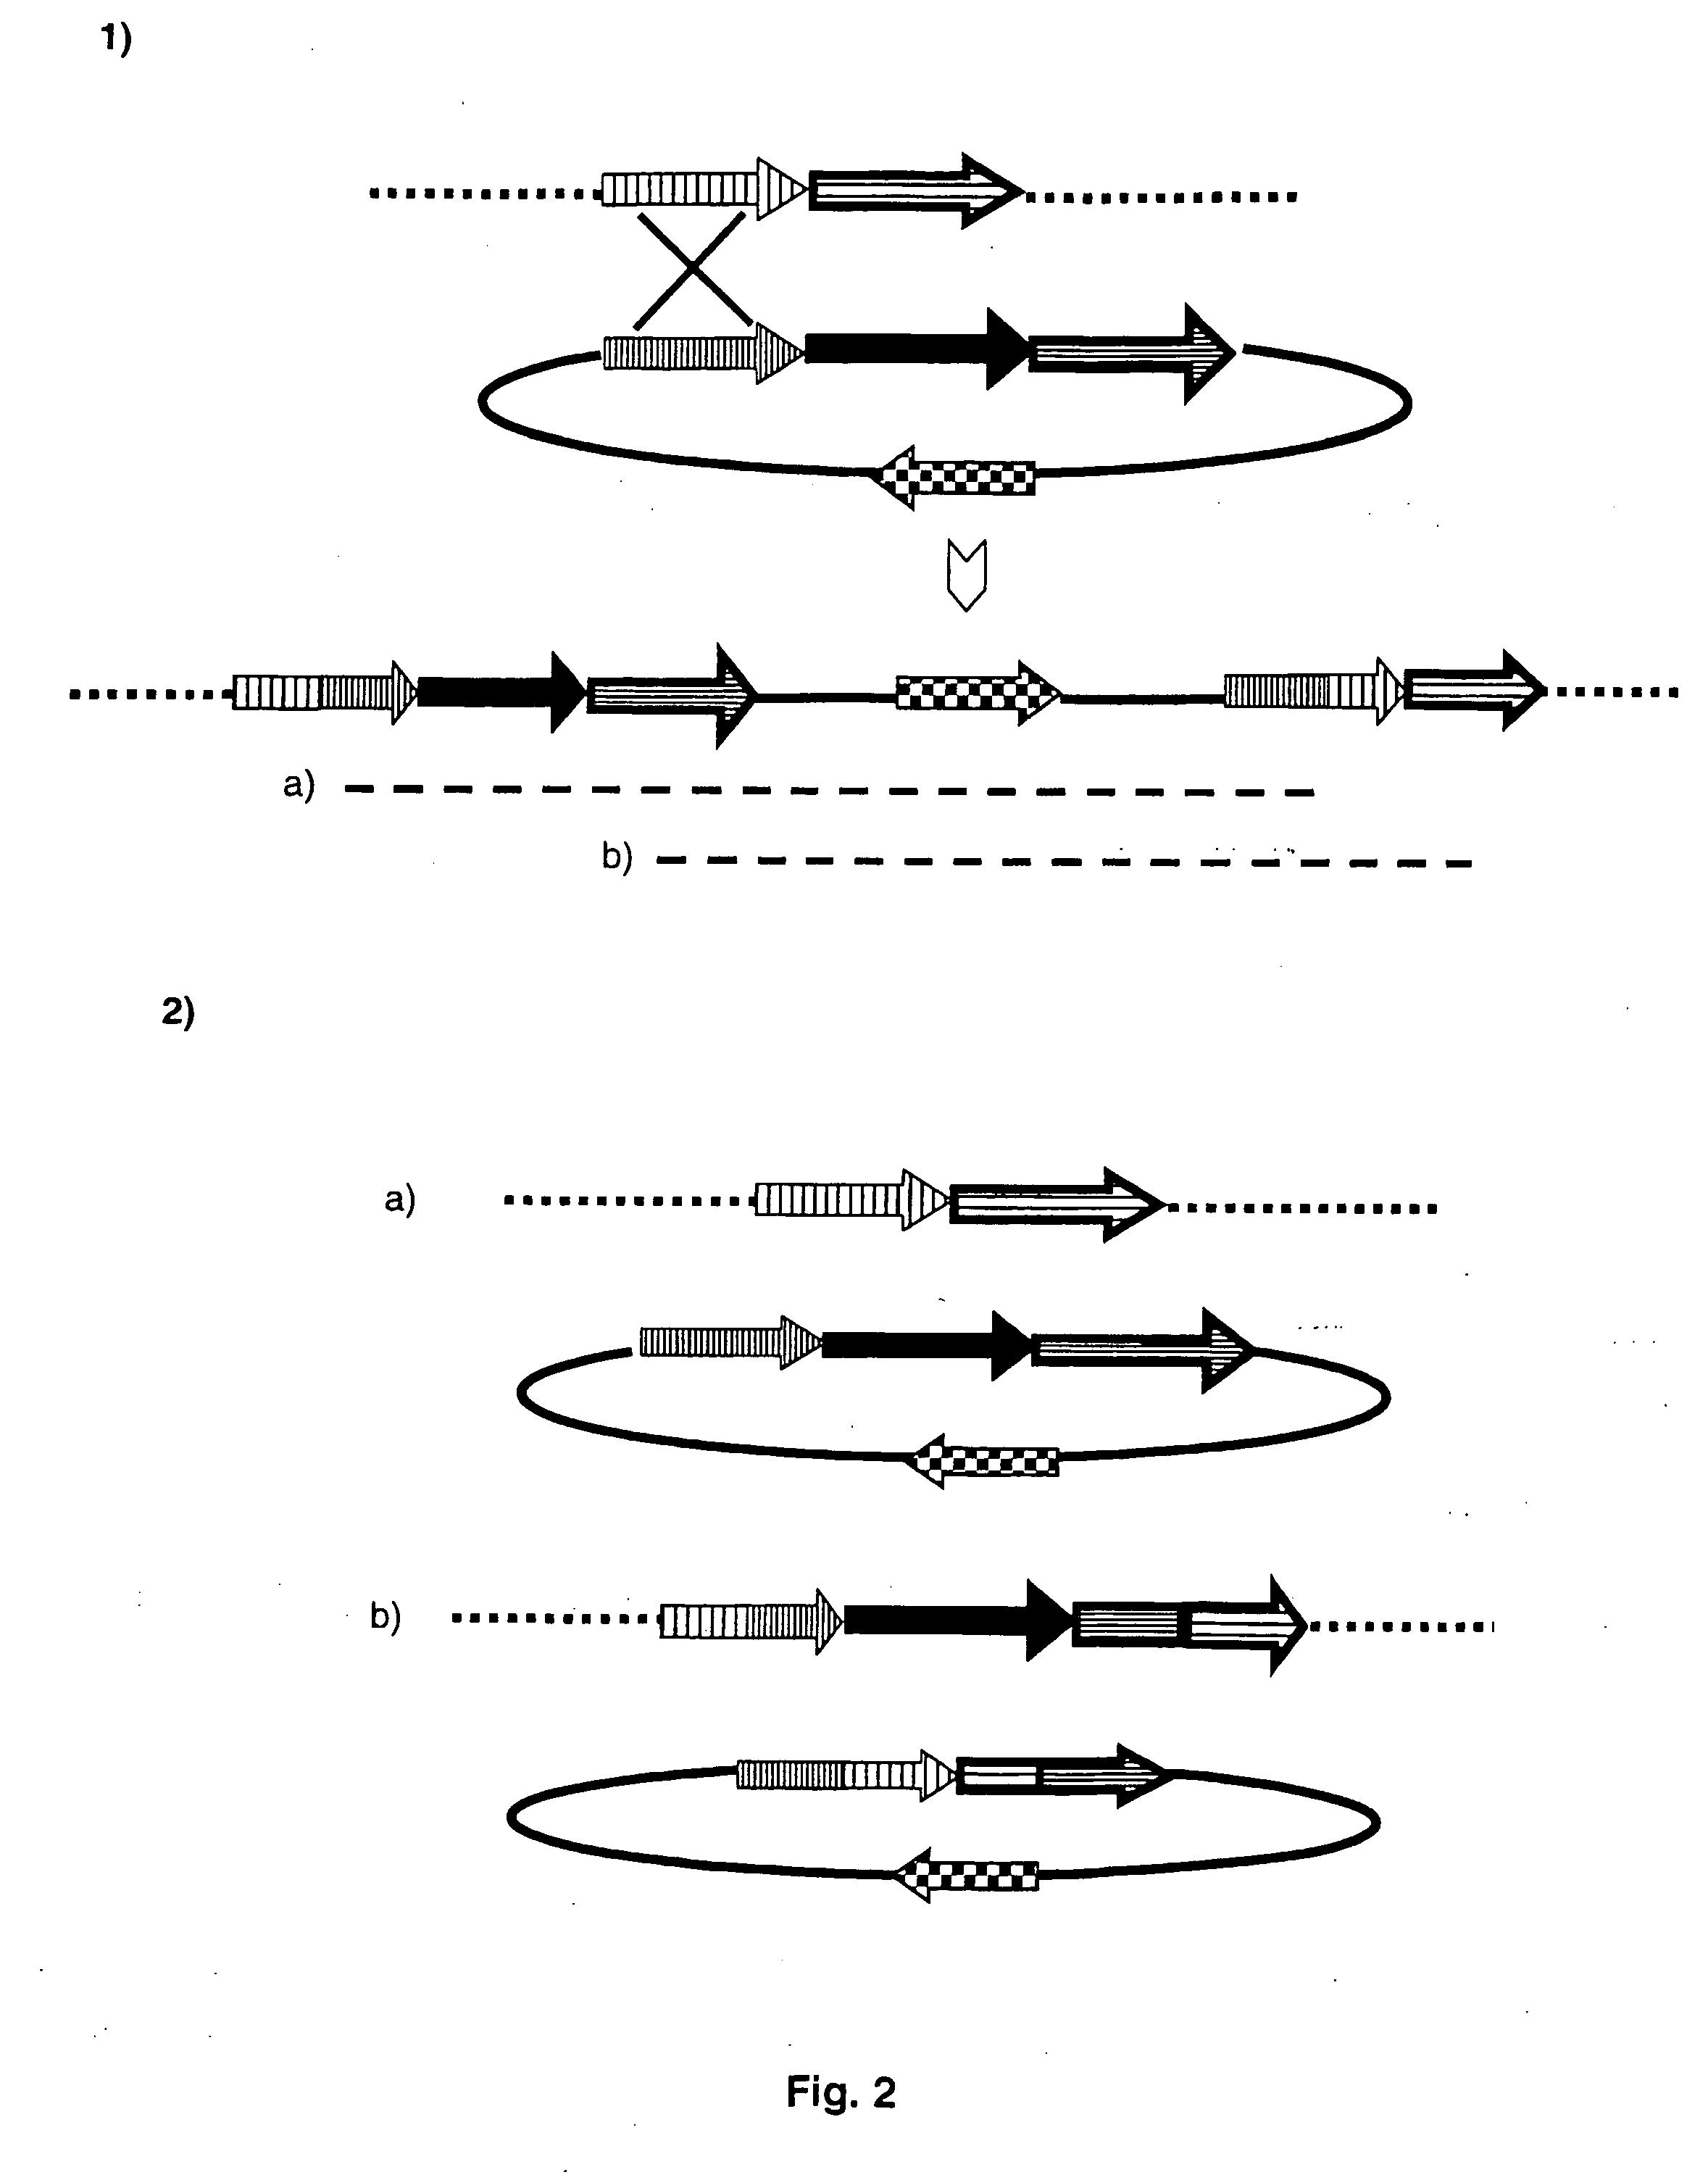 Gene expression in plastids based on replicating vectors